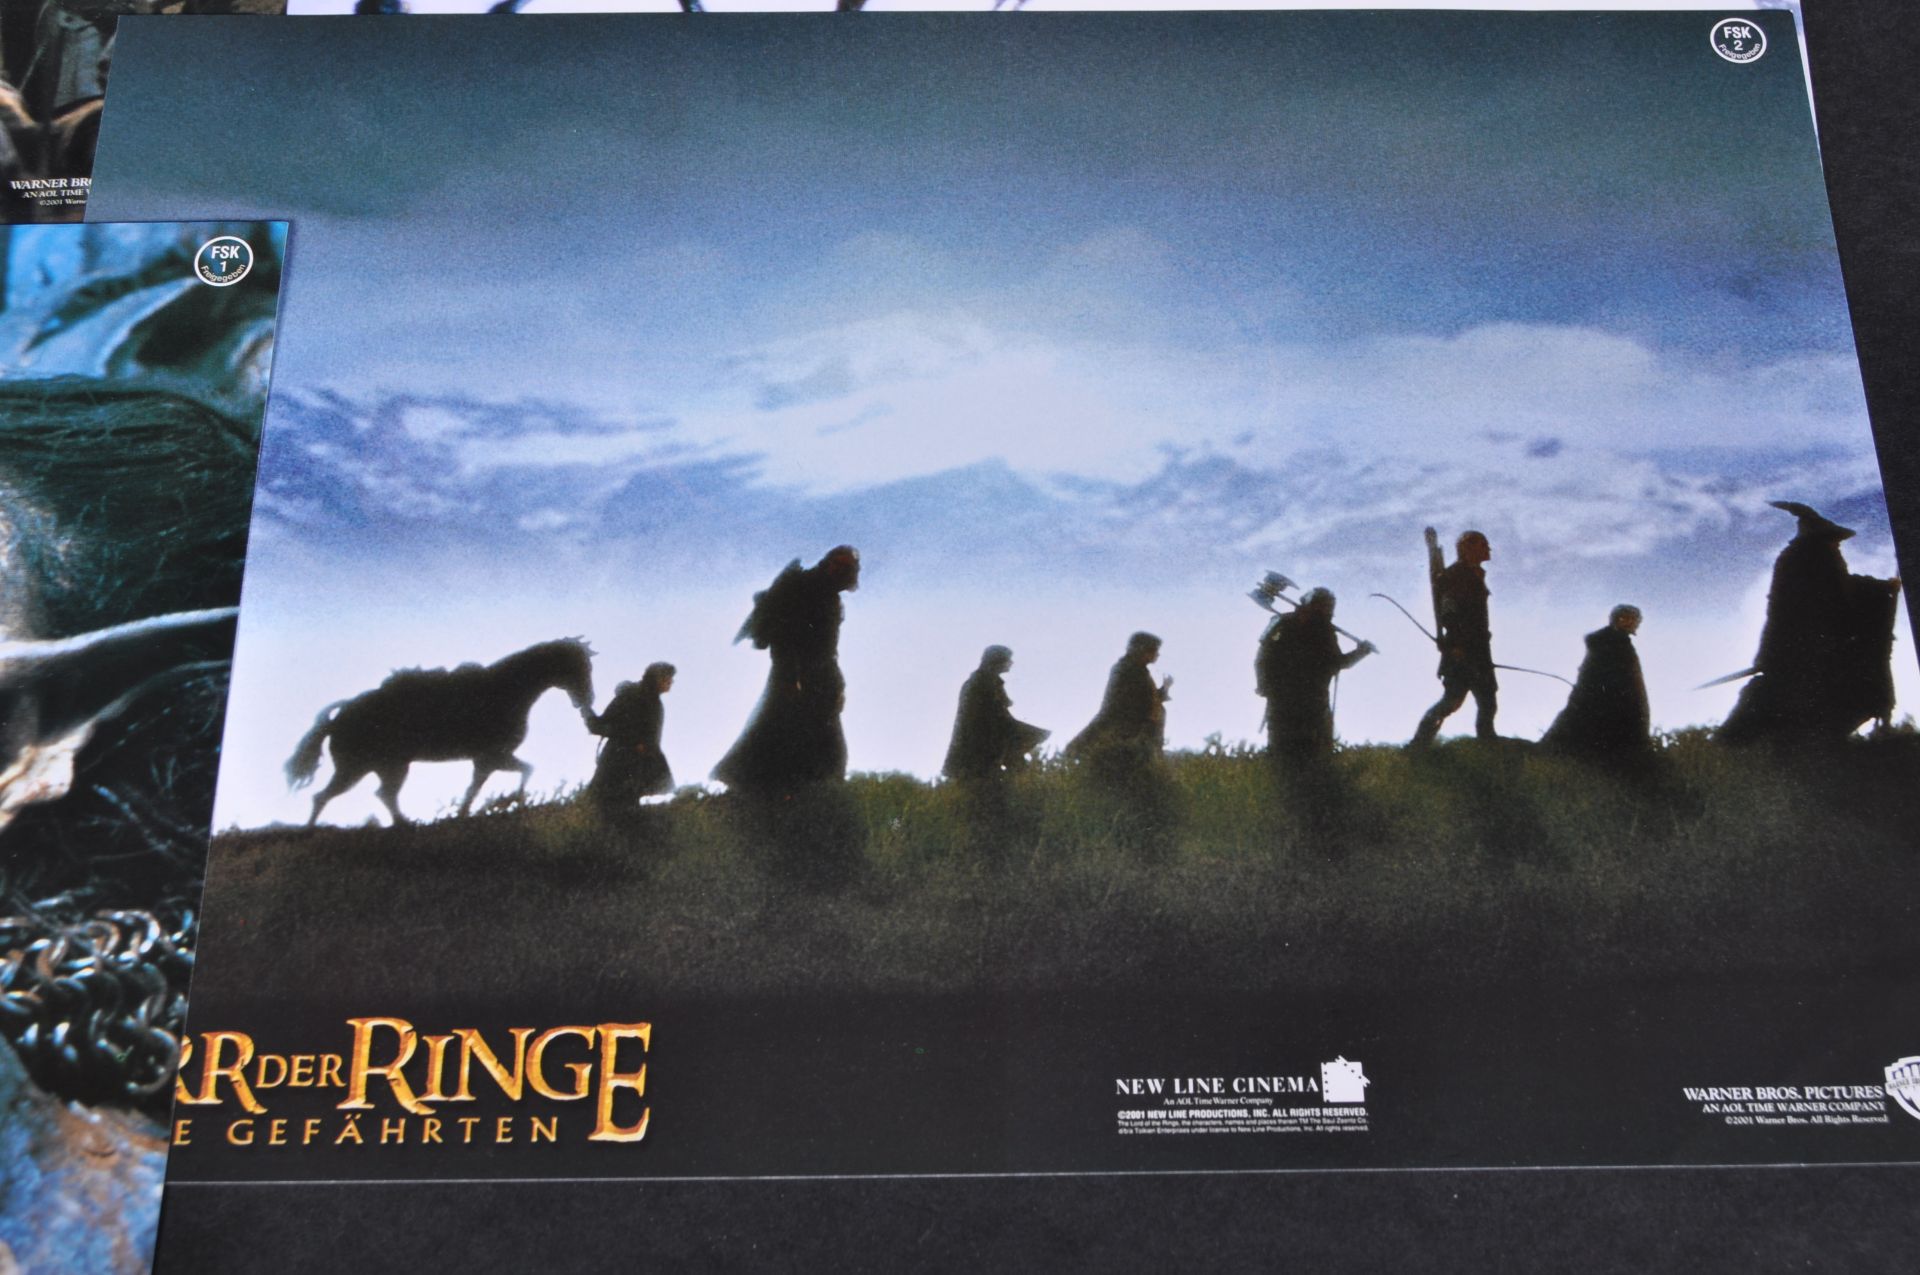 LORD OF THE RINGS - FELLOWSHIP OF THE RING - GERMAN CINEMA LOBBY CARDS - Bild 5 aus 8